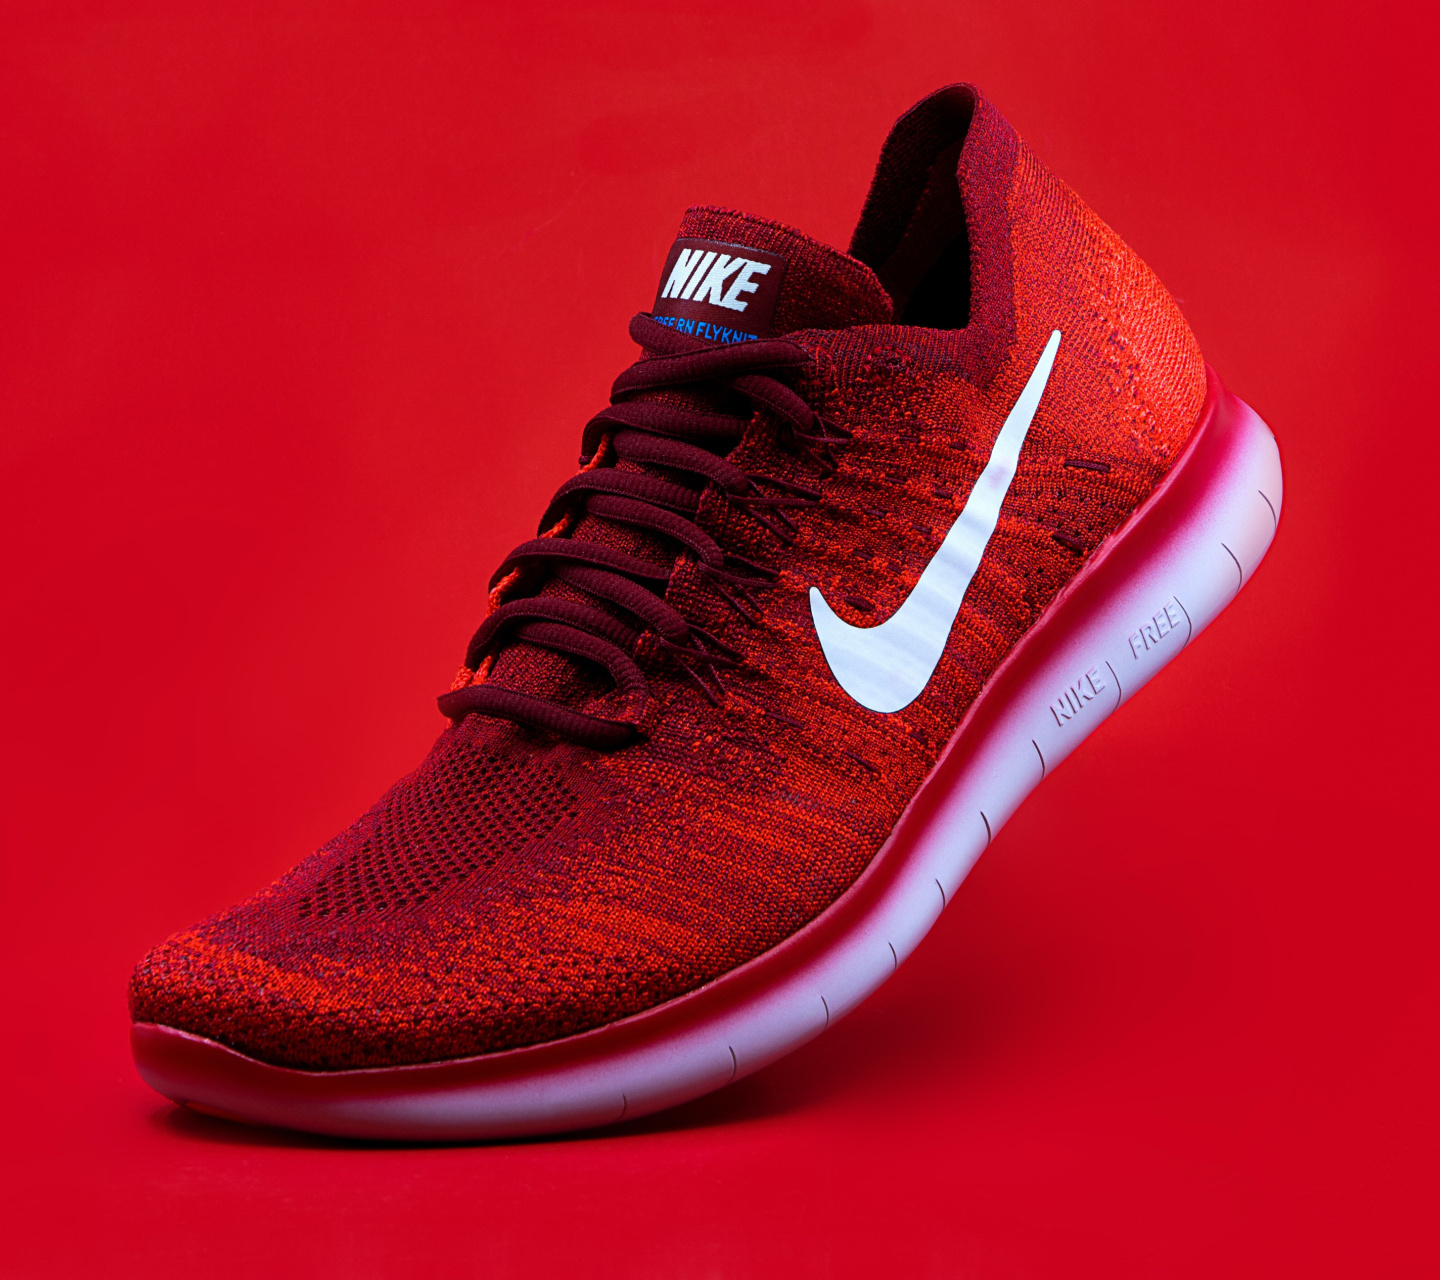 Red Nike Shoes wallpaper 1440x1280